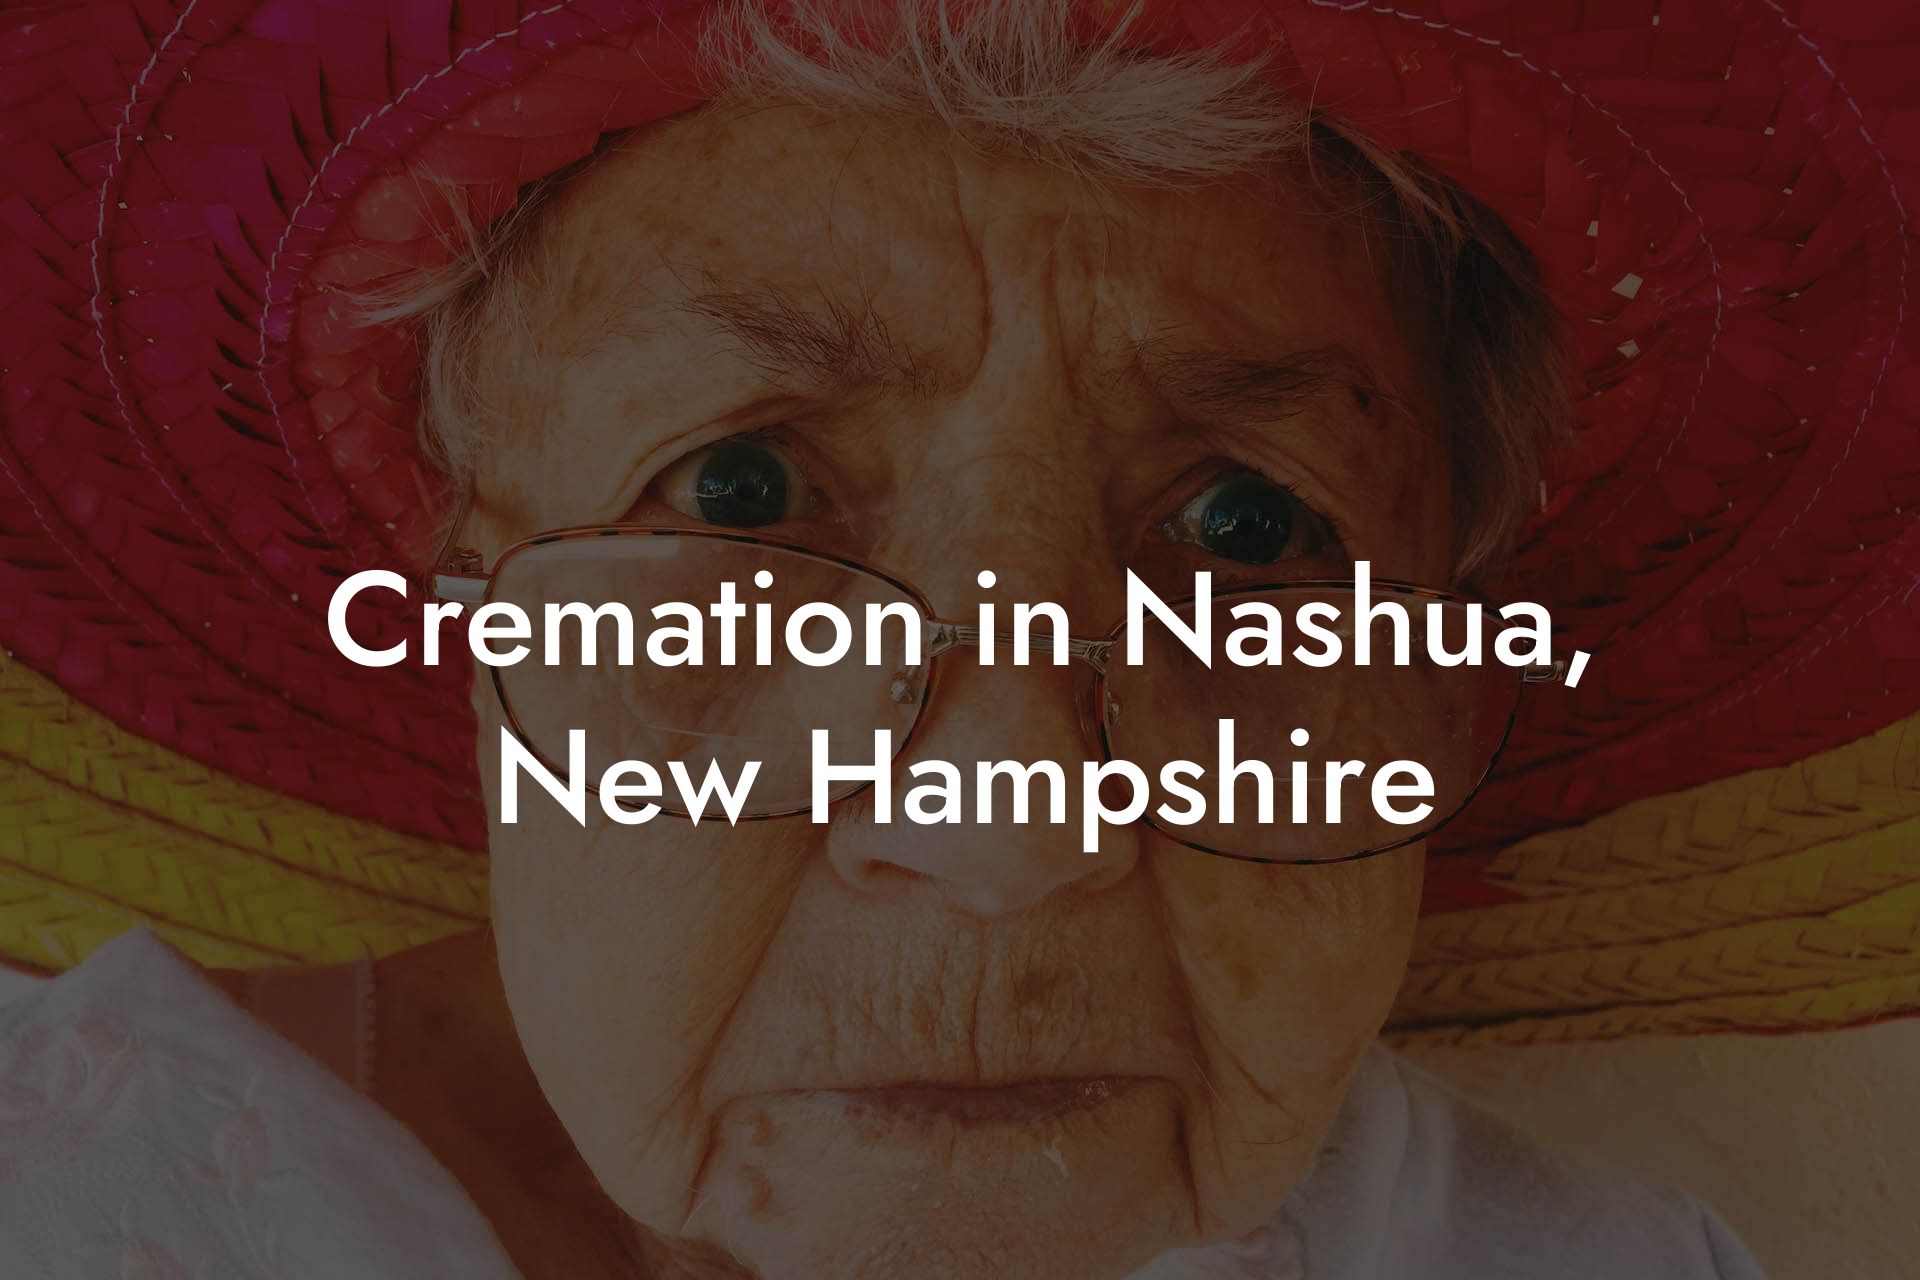 Cremation in Nashua, New Hampshire